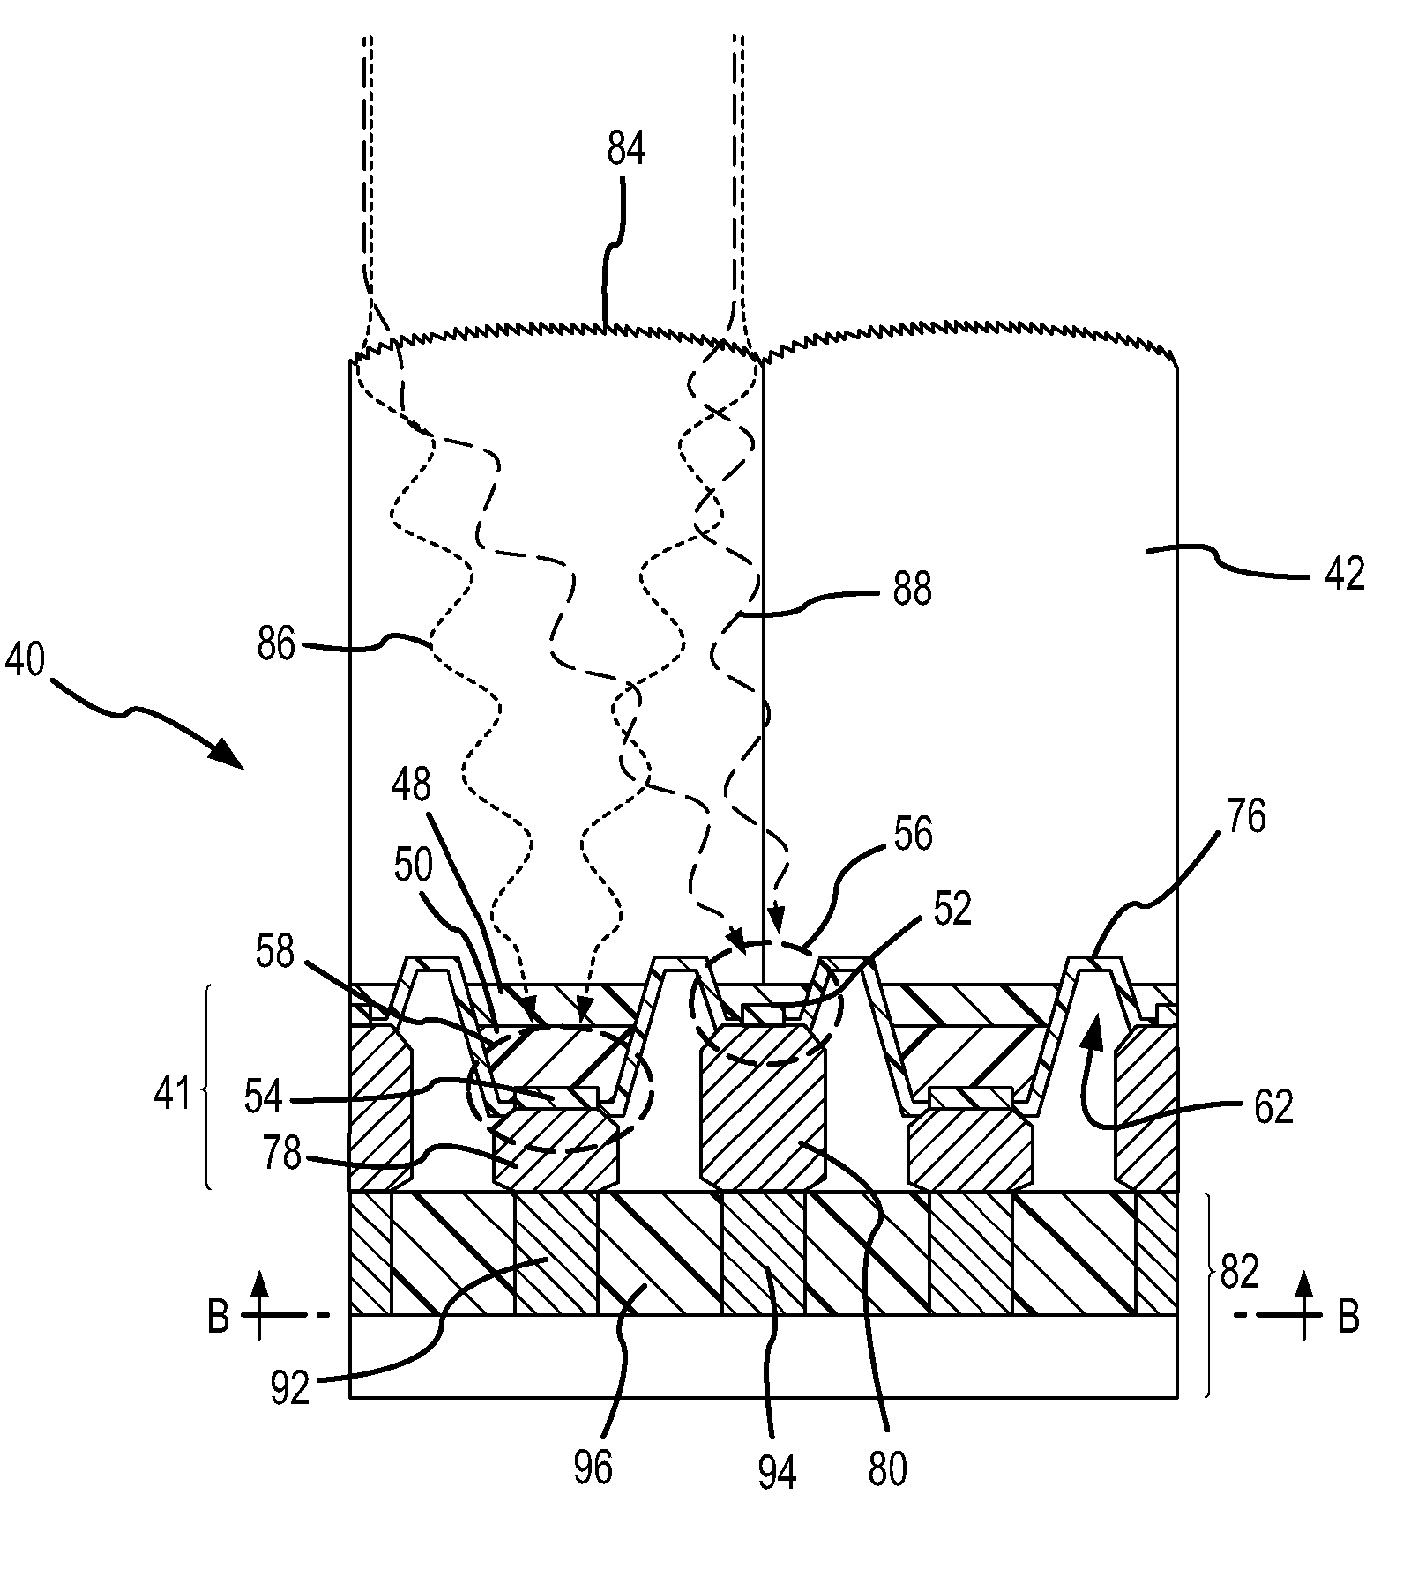 Multimode focal plane array with electrically isolated commons for independent sub-array biasing